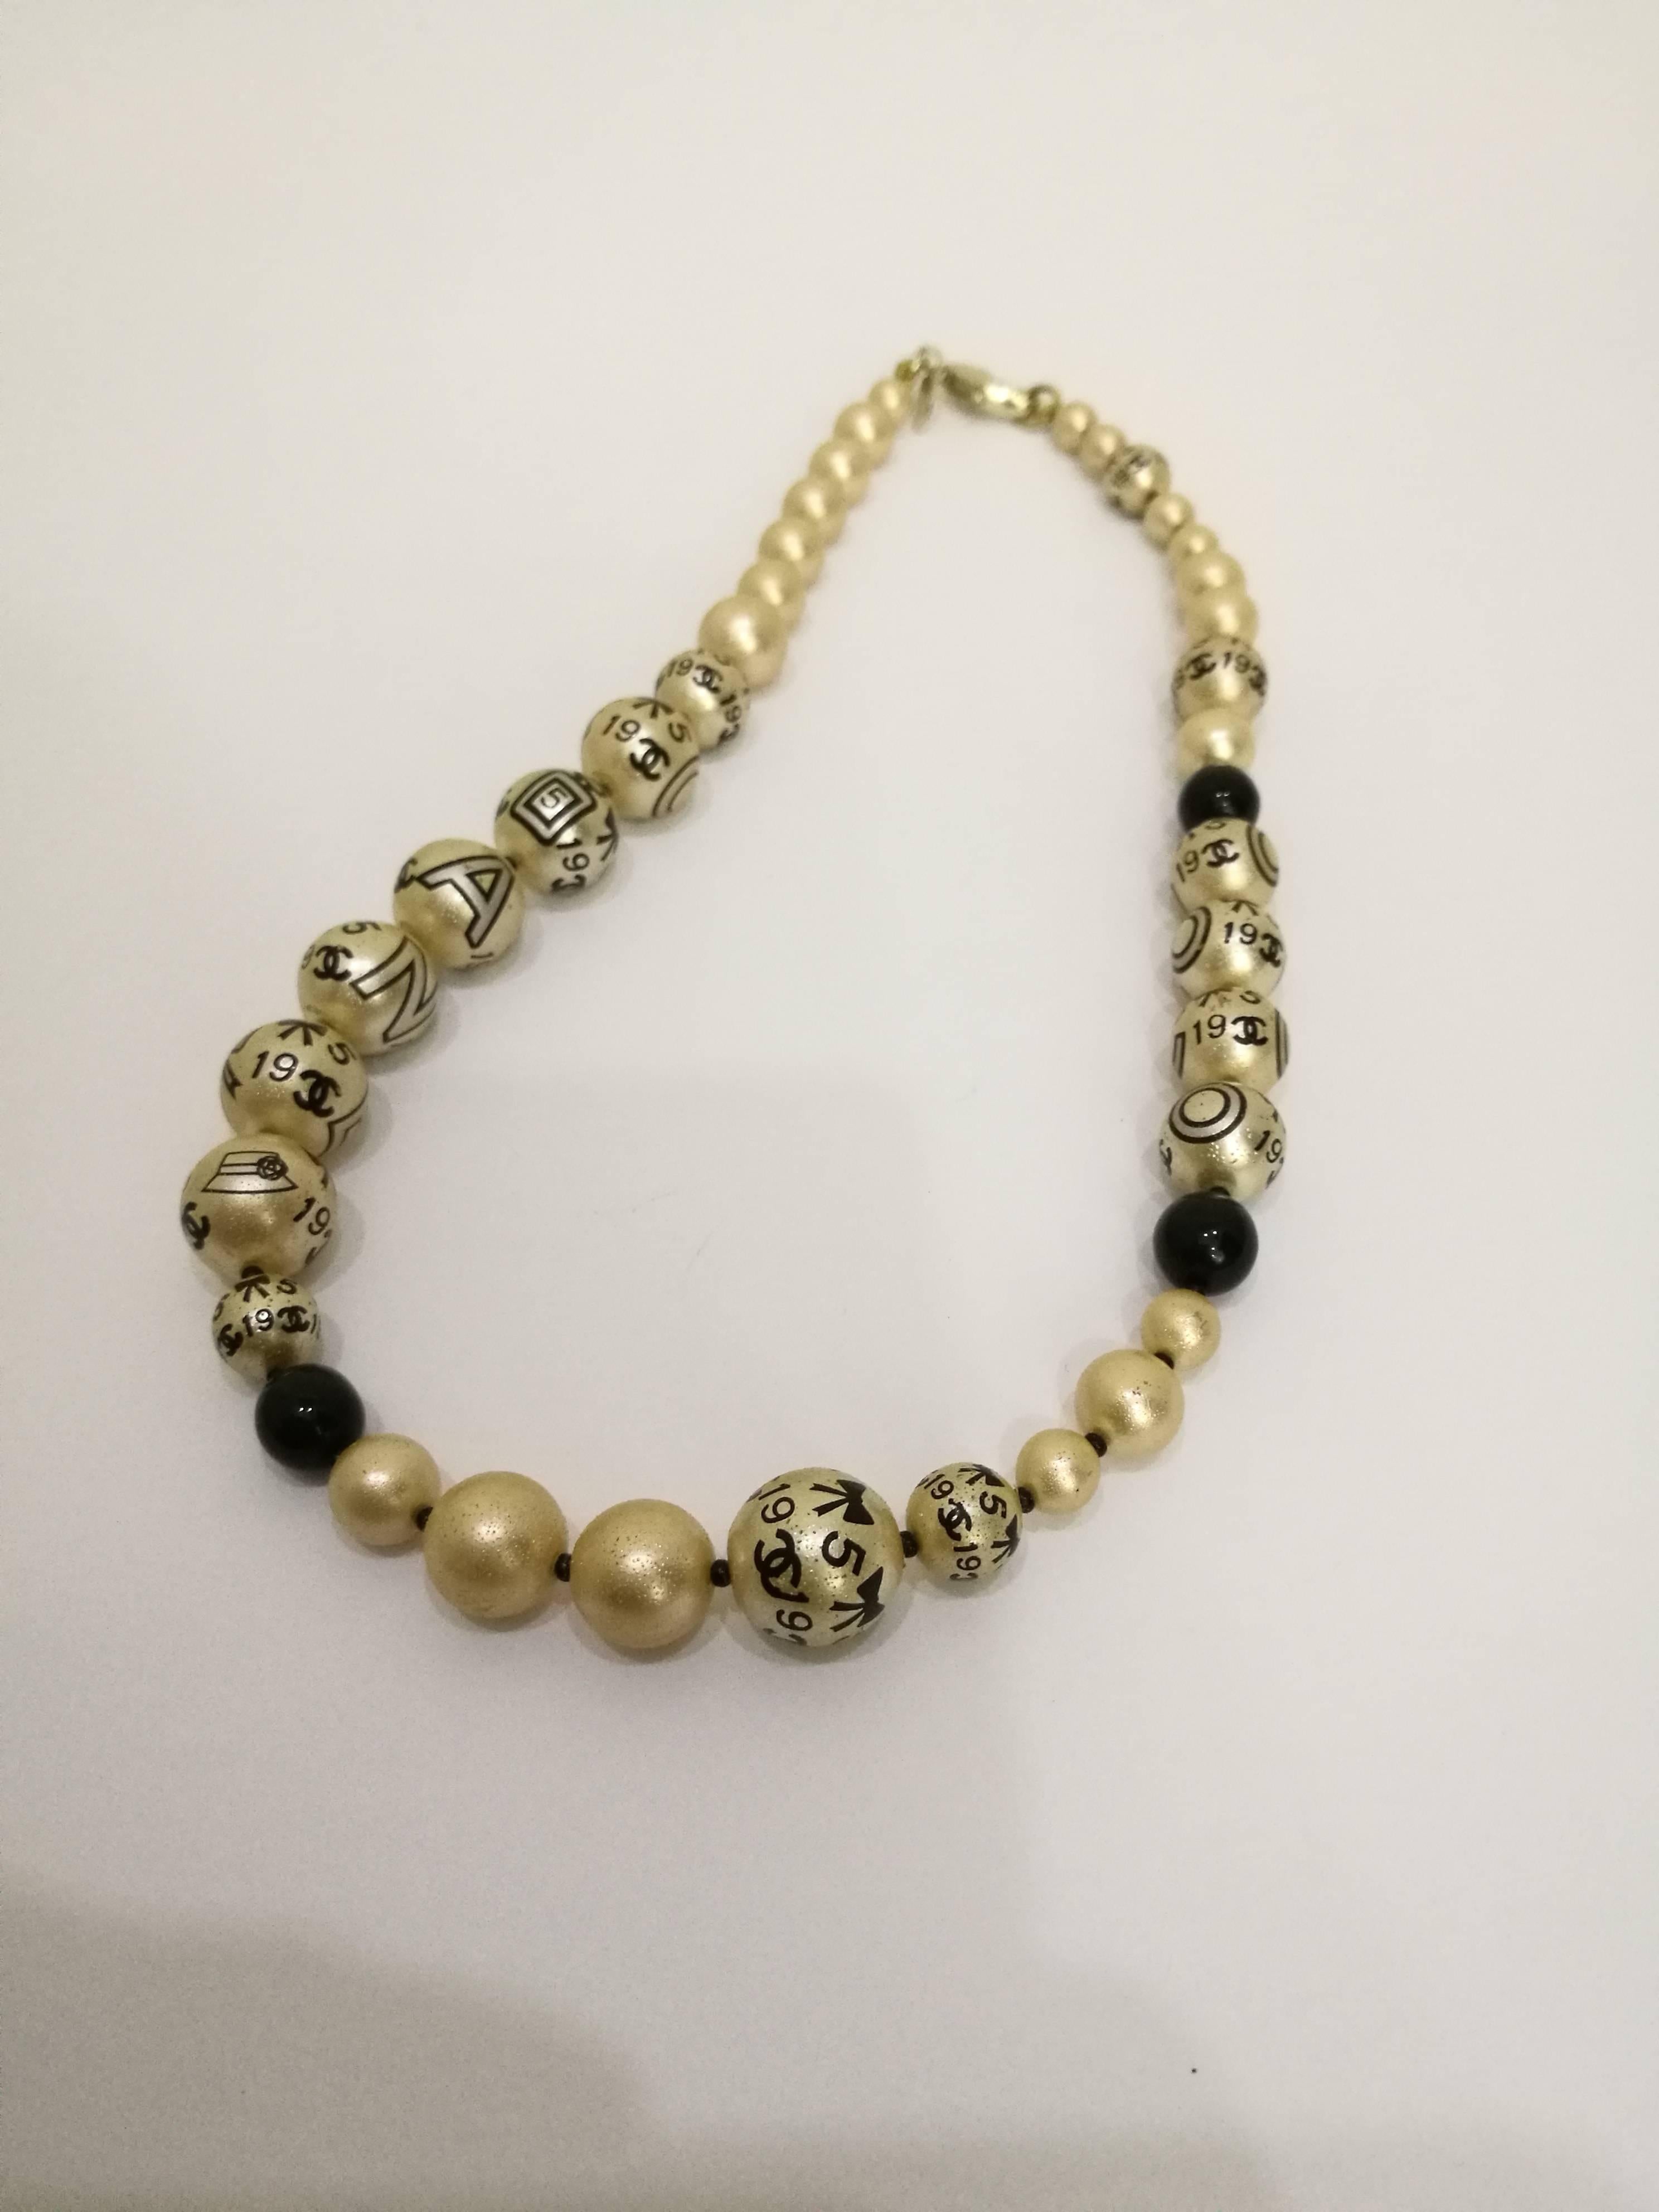 Chanel Faux Pearls Necklace
Cream and black tone faux pearls
Gold tone closure